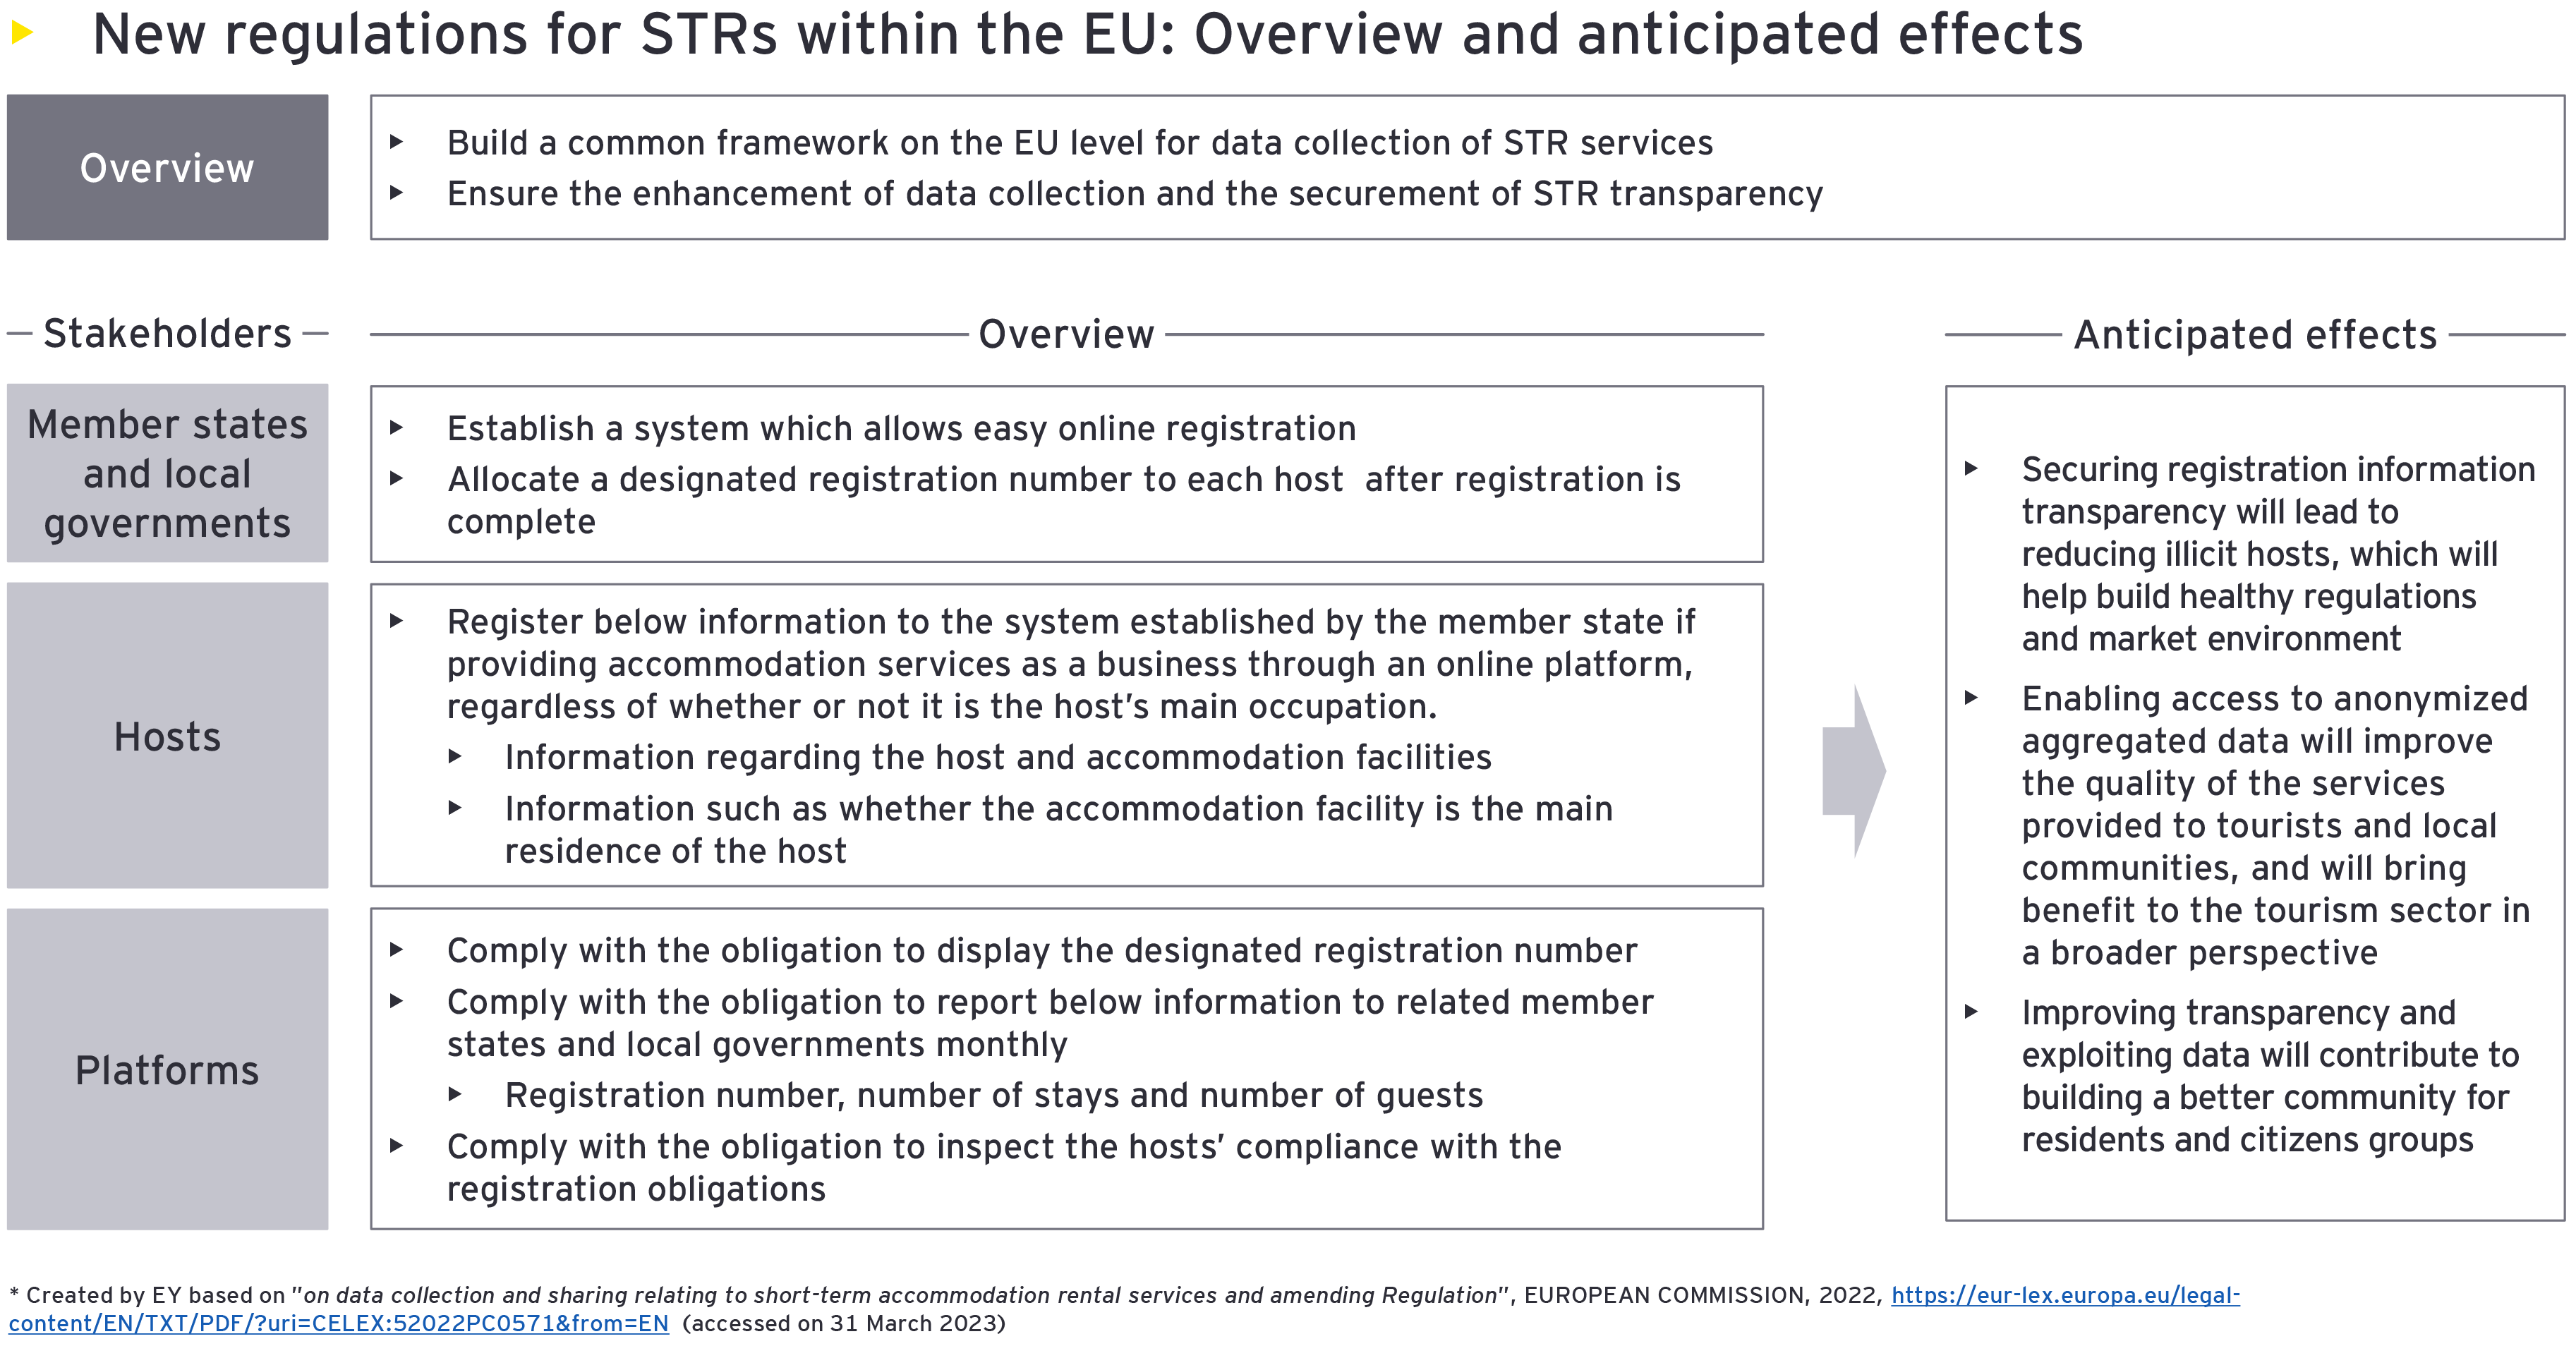 Figure5: New regulations for STRs within the EU: Overview and anticipated effects